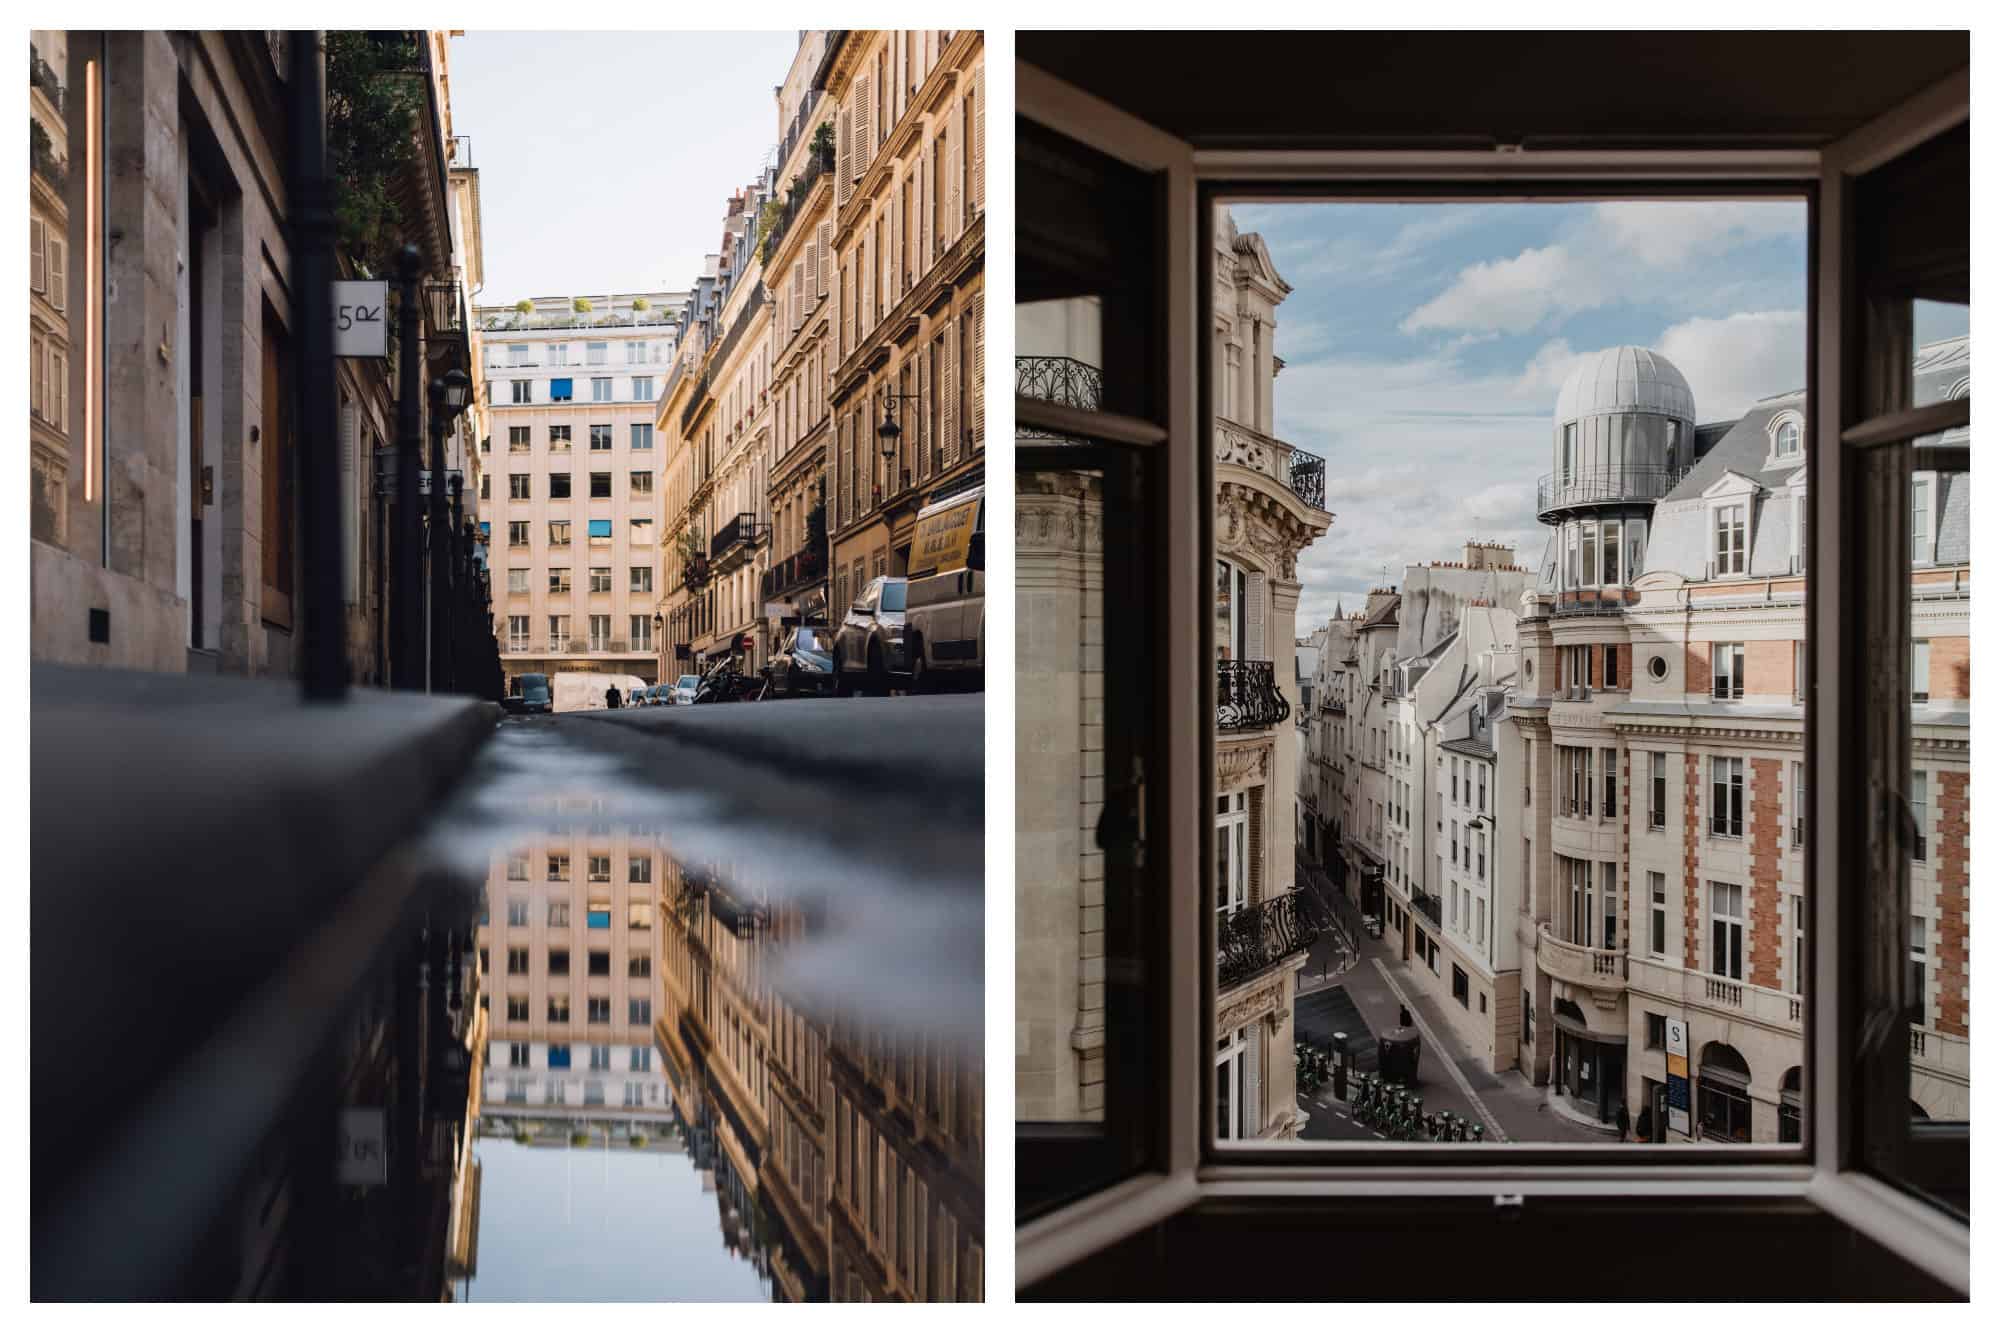 The reflection of a Parisian stone building in a puddle (left). The view of a street lined by honey-colored stone buildings in Paris through an open window (right).